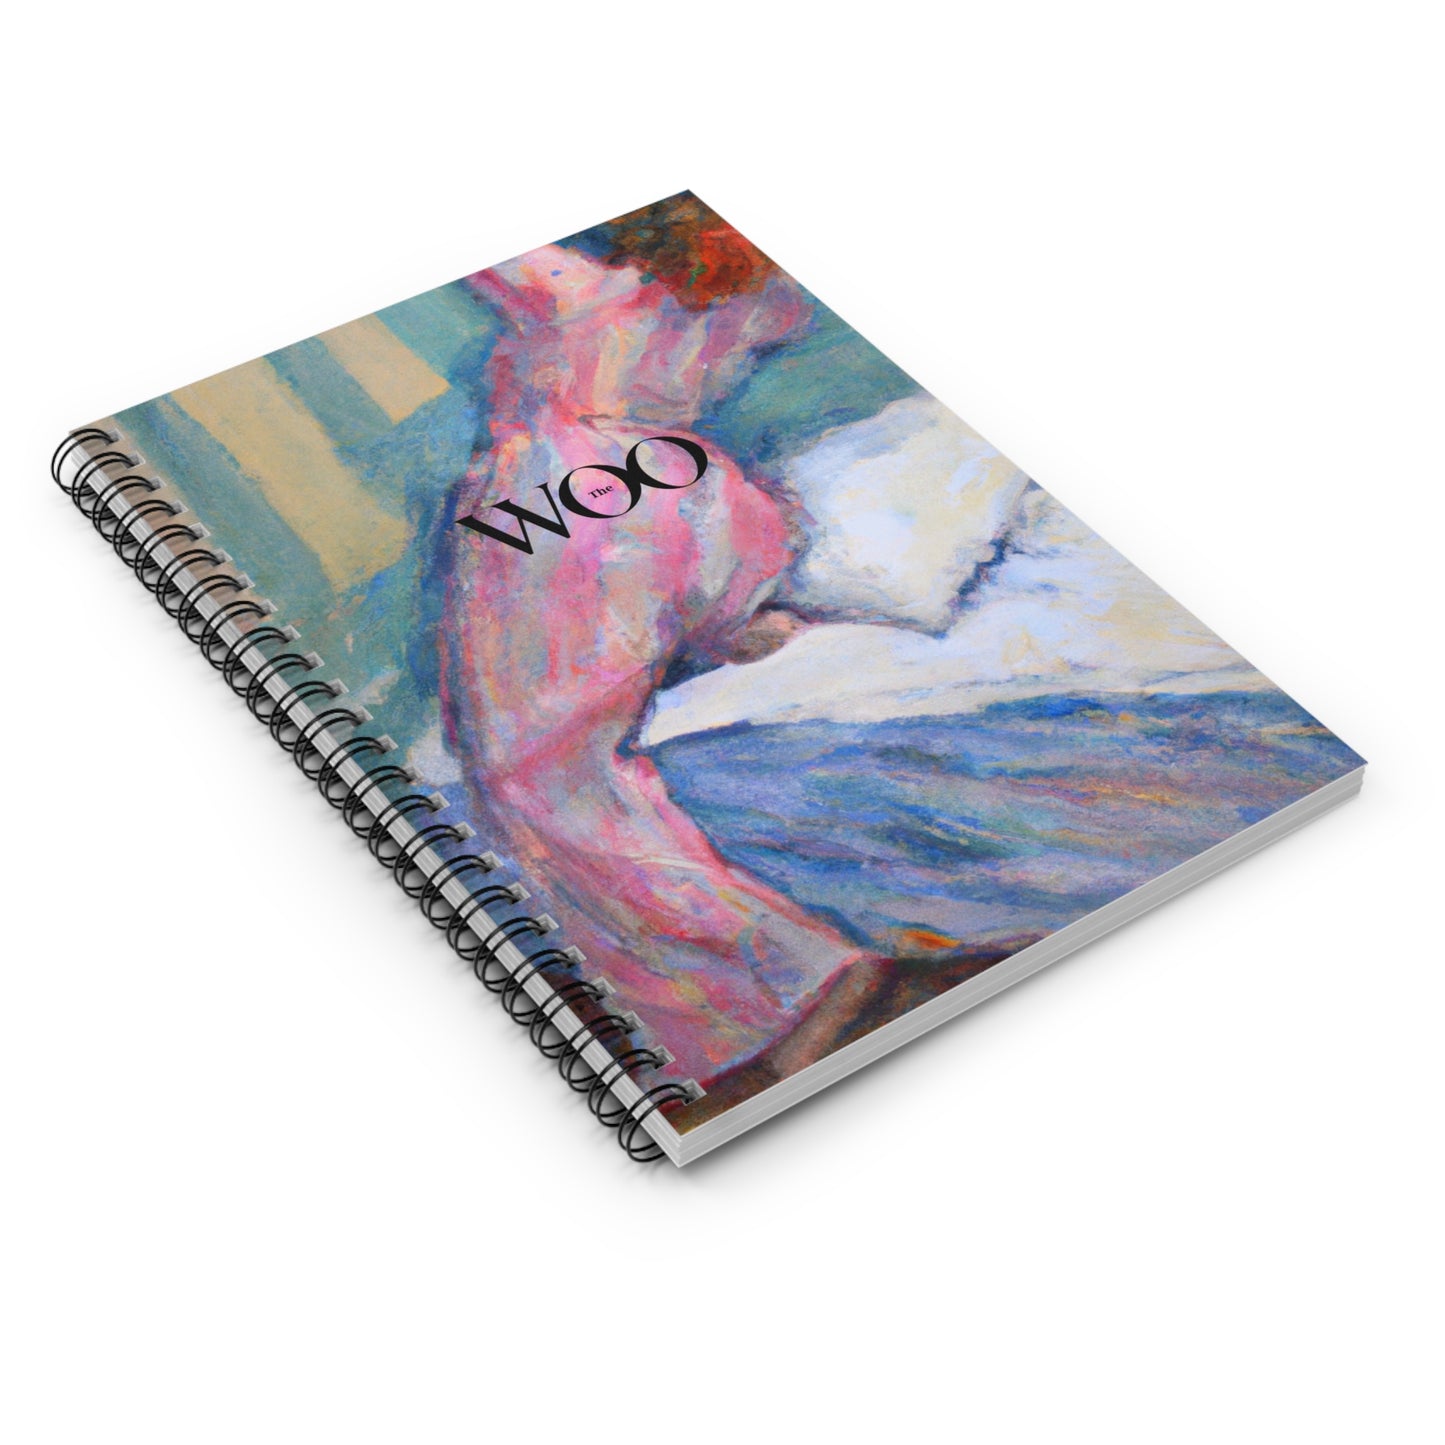 Idea's In The Night - Ruled Line Notebook